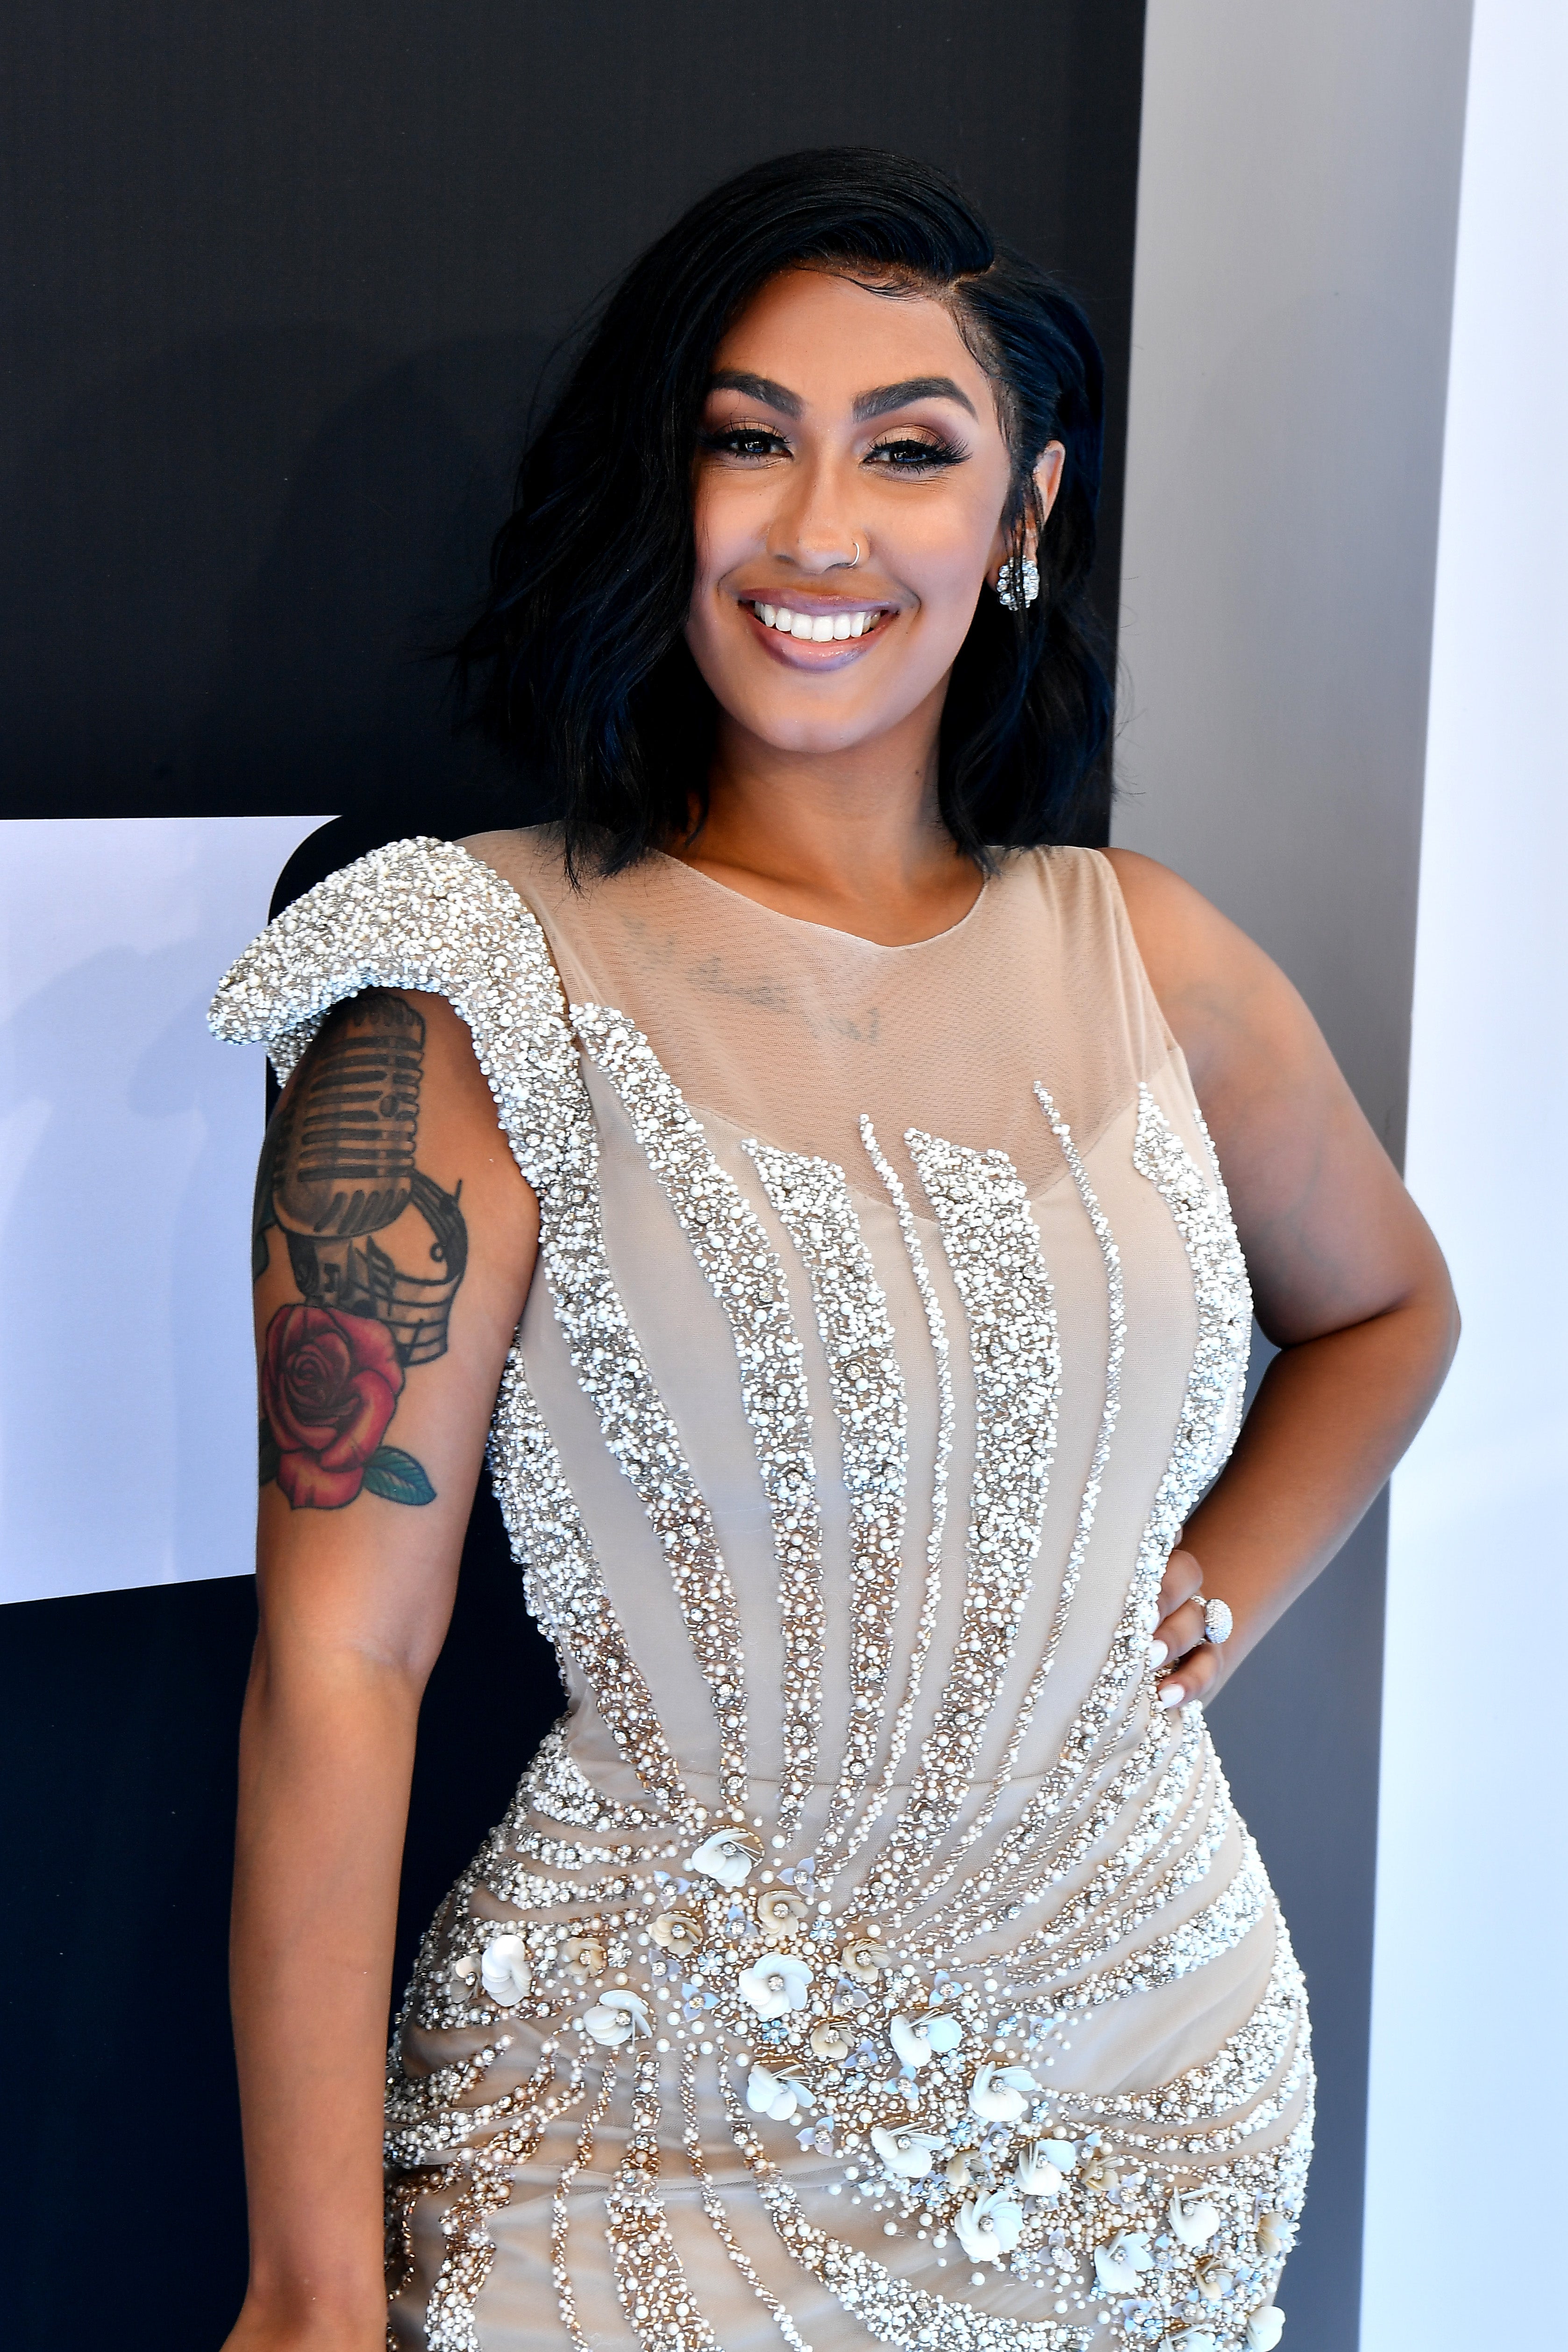 Red Carpet Beauty From The 2019 BET Awards